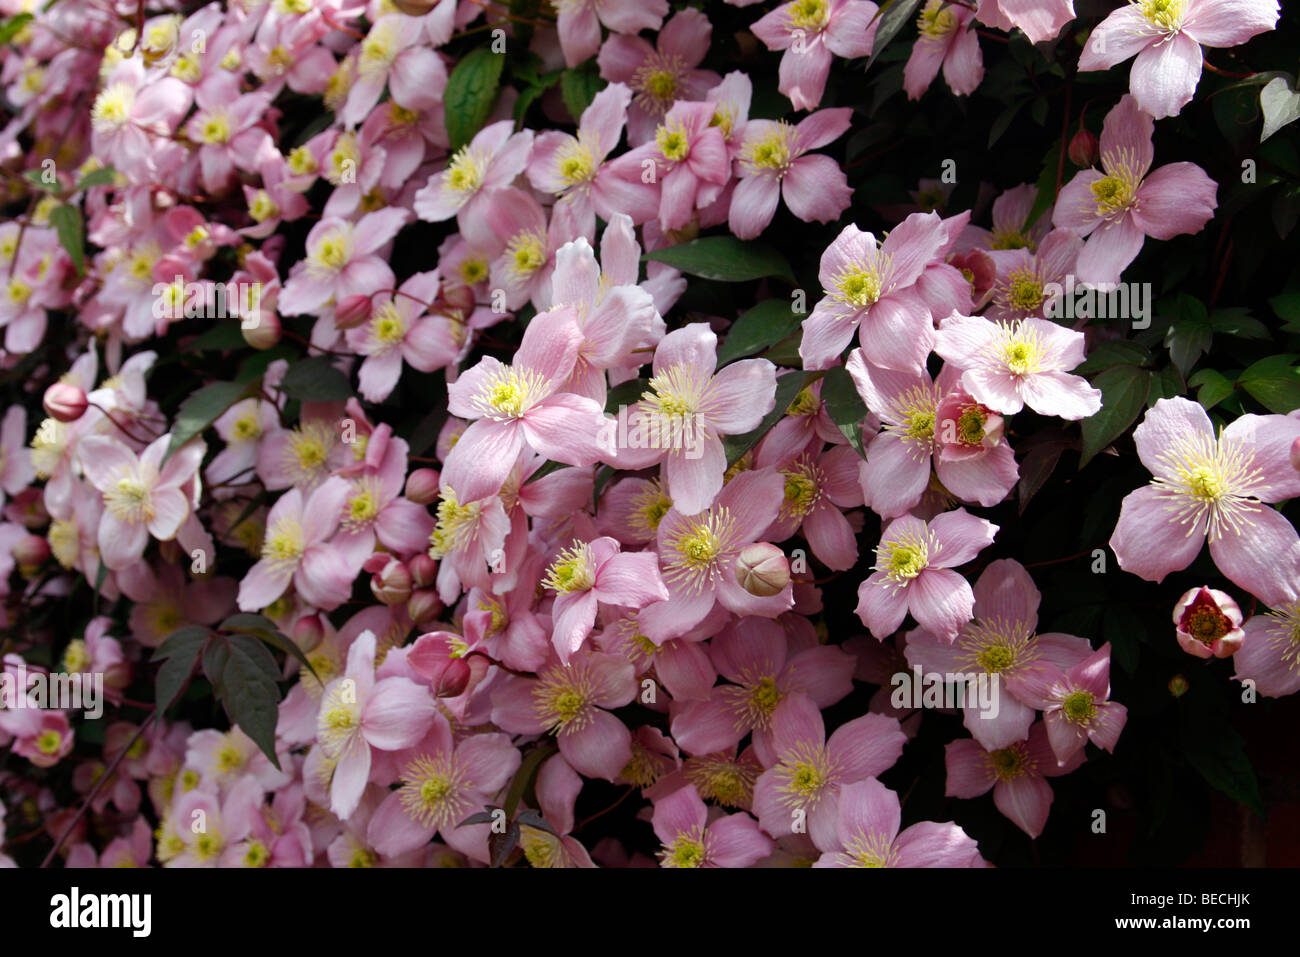 Clematis montana used to break a hard edge in a built environment Stock Photo